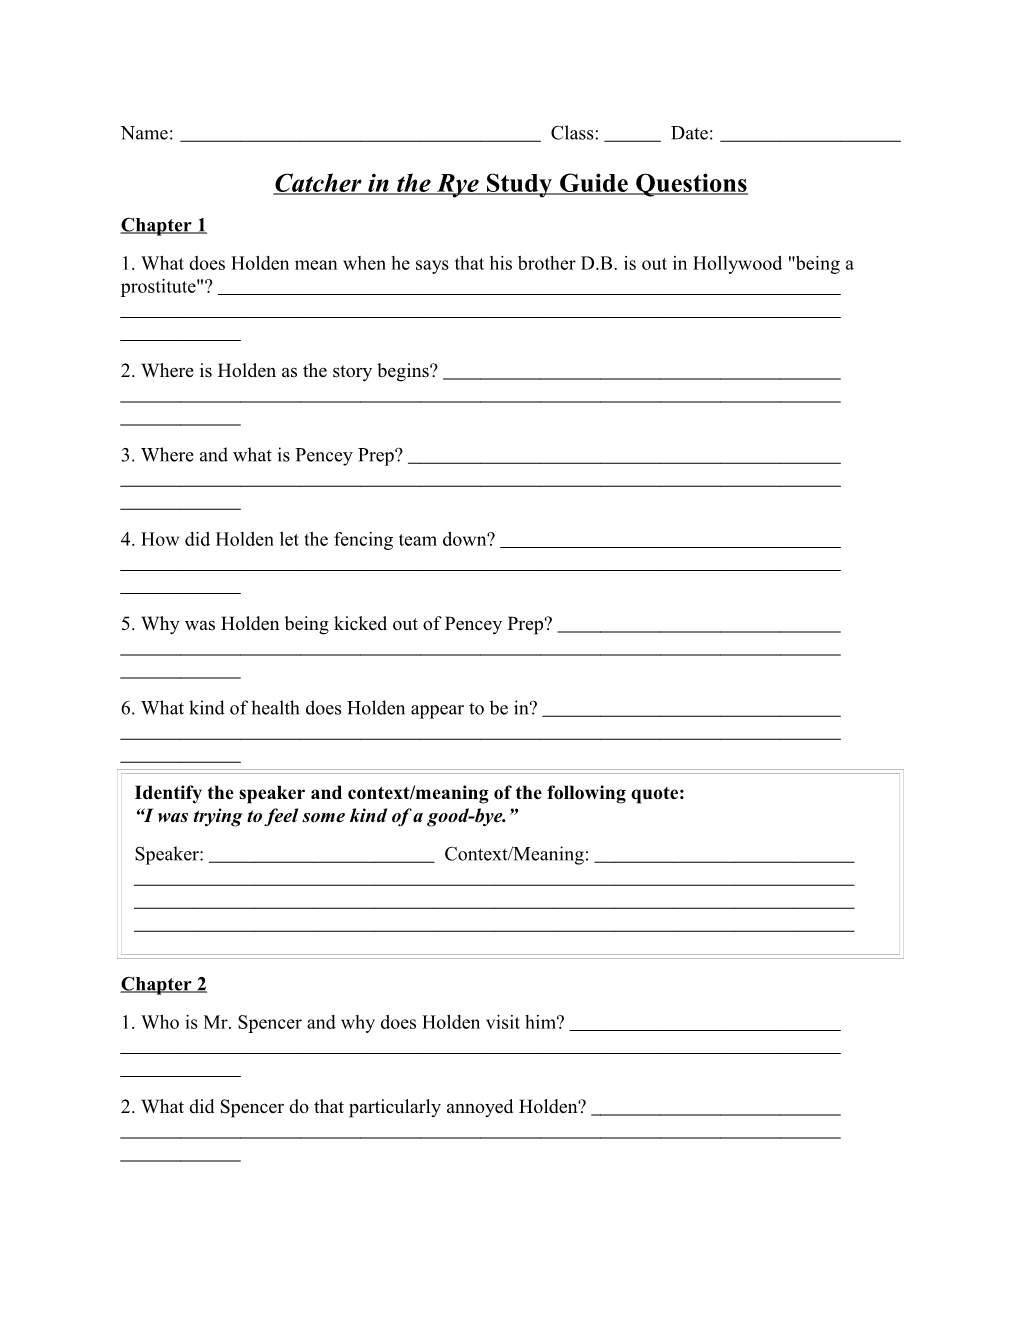 Catcher in the Rye Study Guide Questions